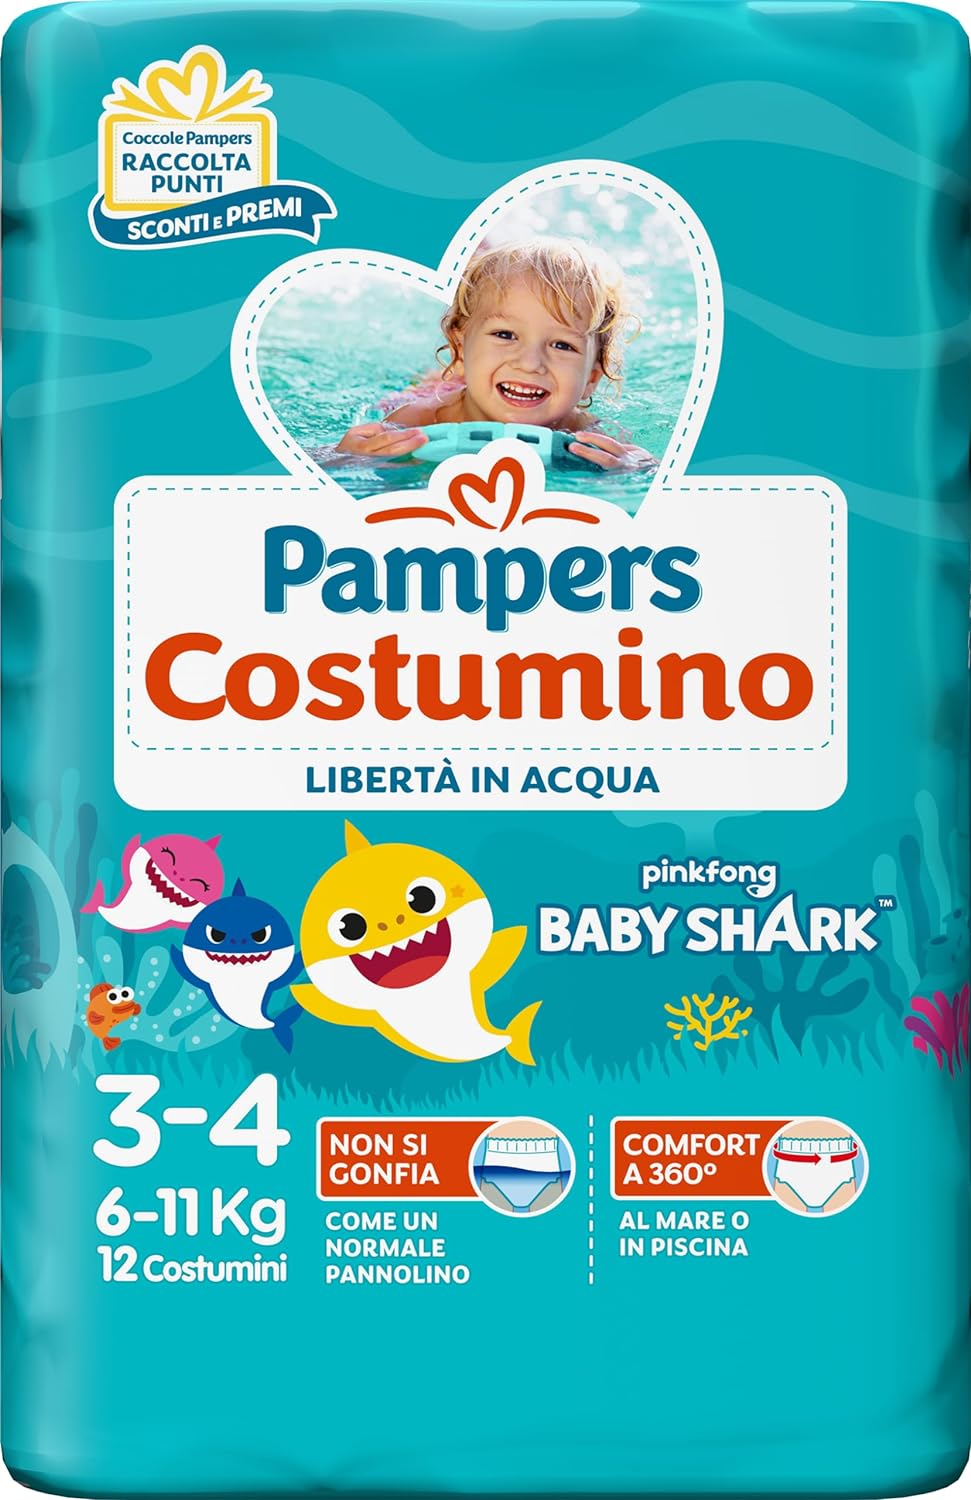 pampers opis pieluchy